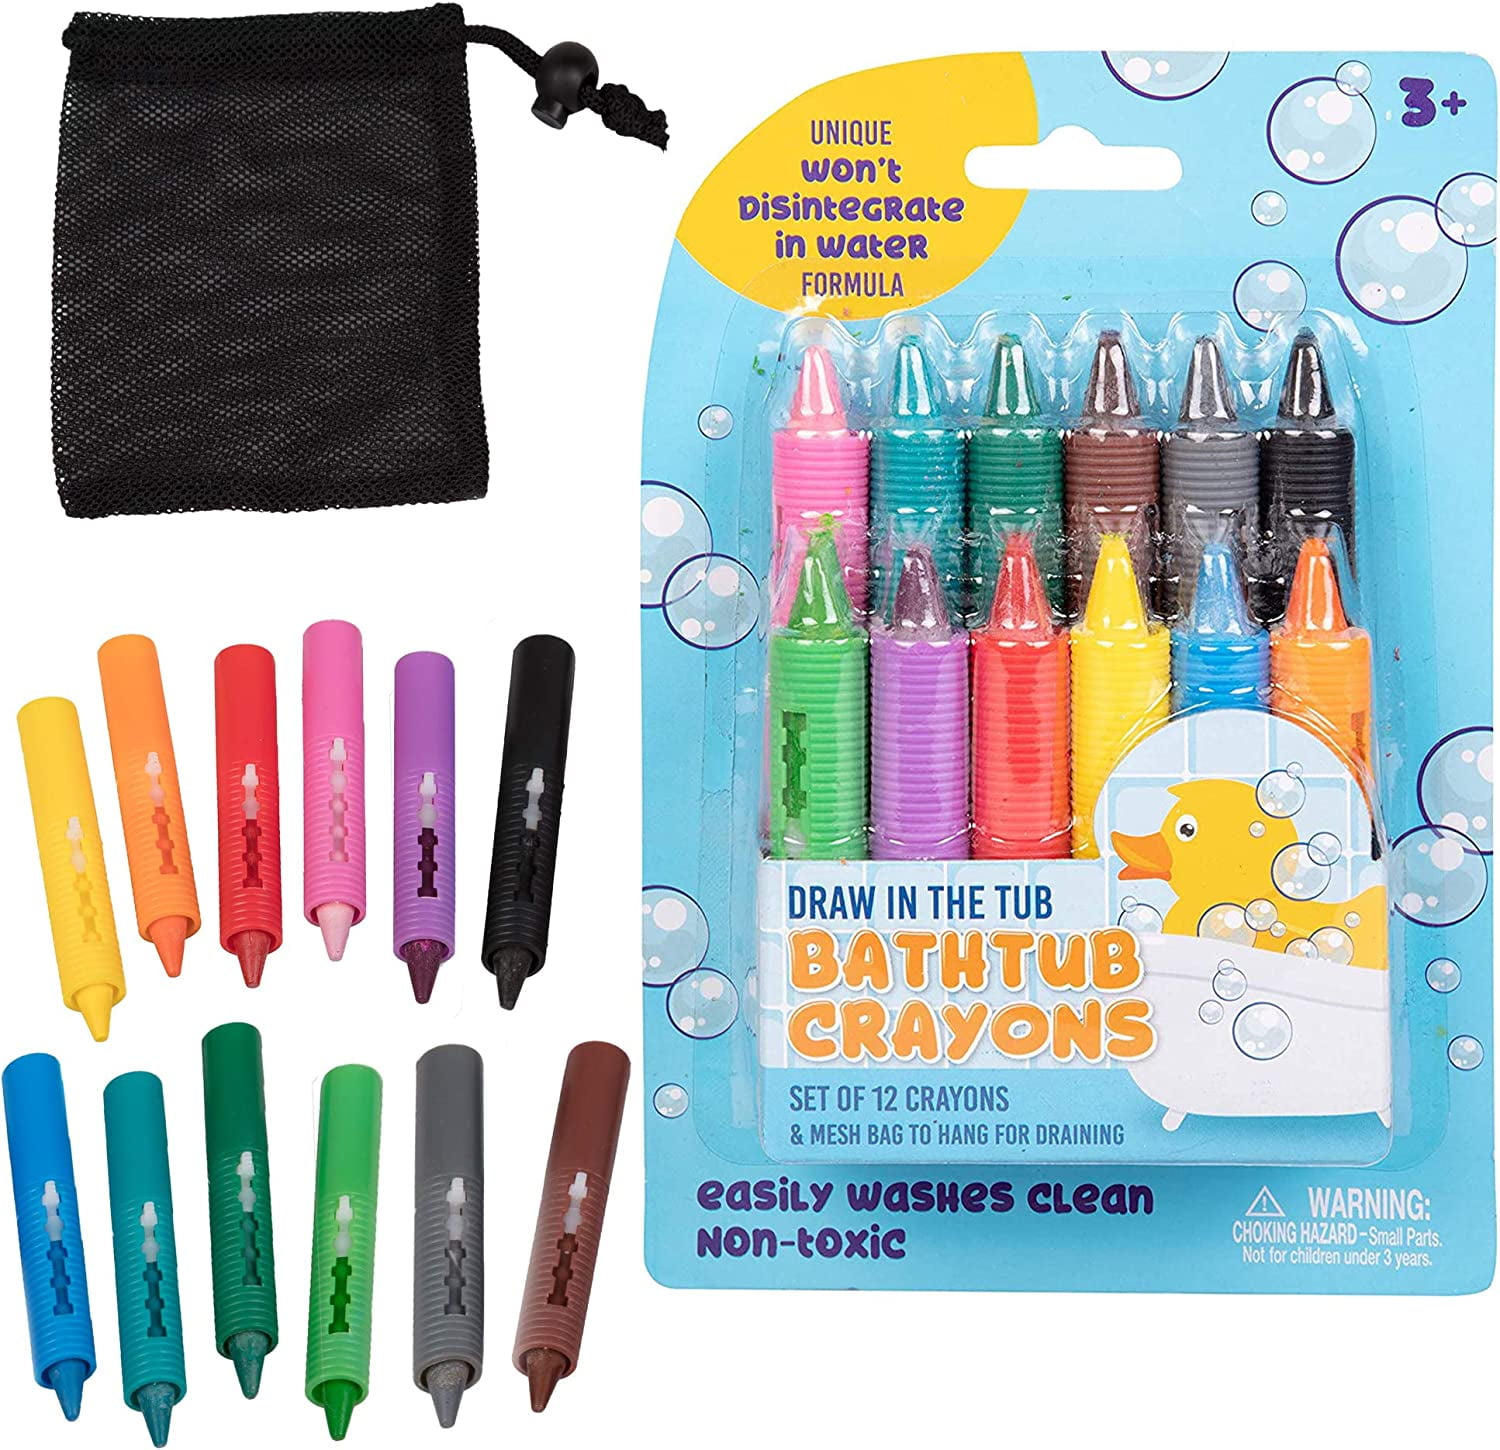 Bath Crayons Super Set - Set of 12 Draw in The Tub Colors with Bathtub Mesh  Bag, Unique Won't Disintegrate in Water Formula - Easter Basket